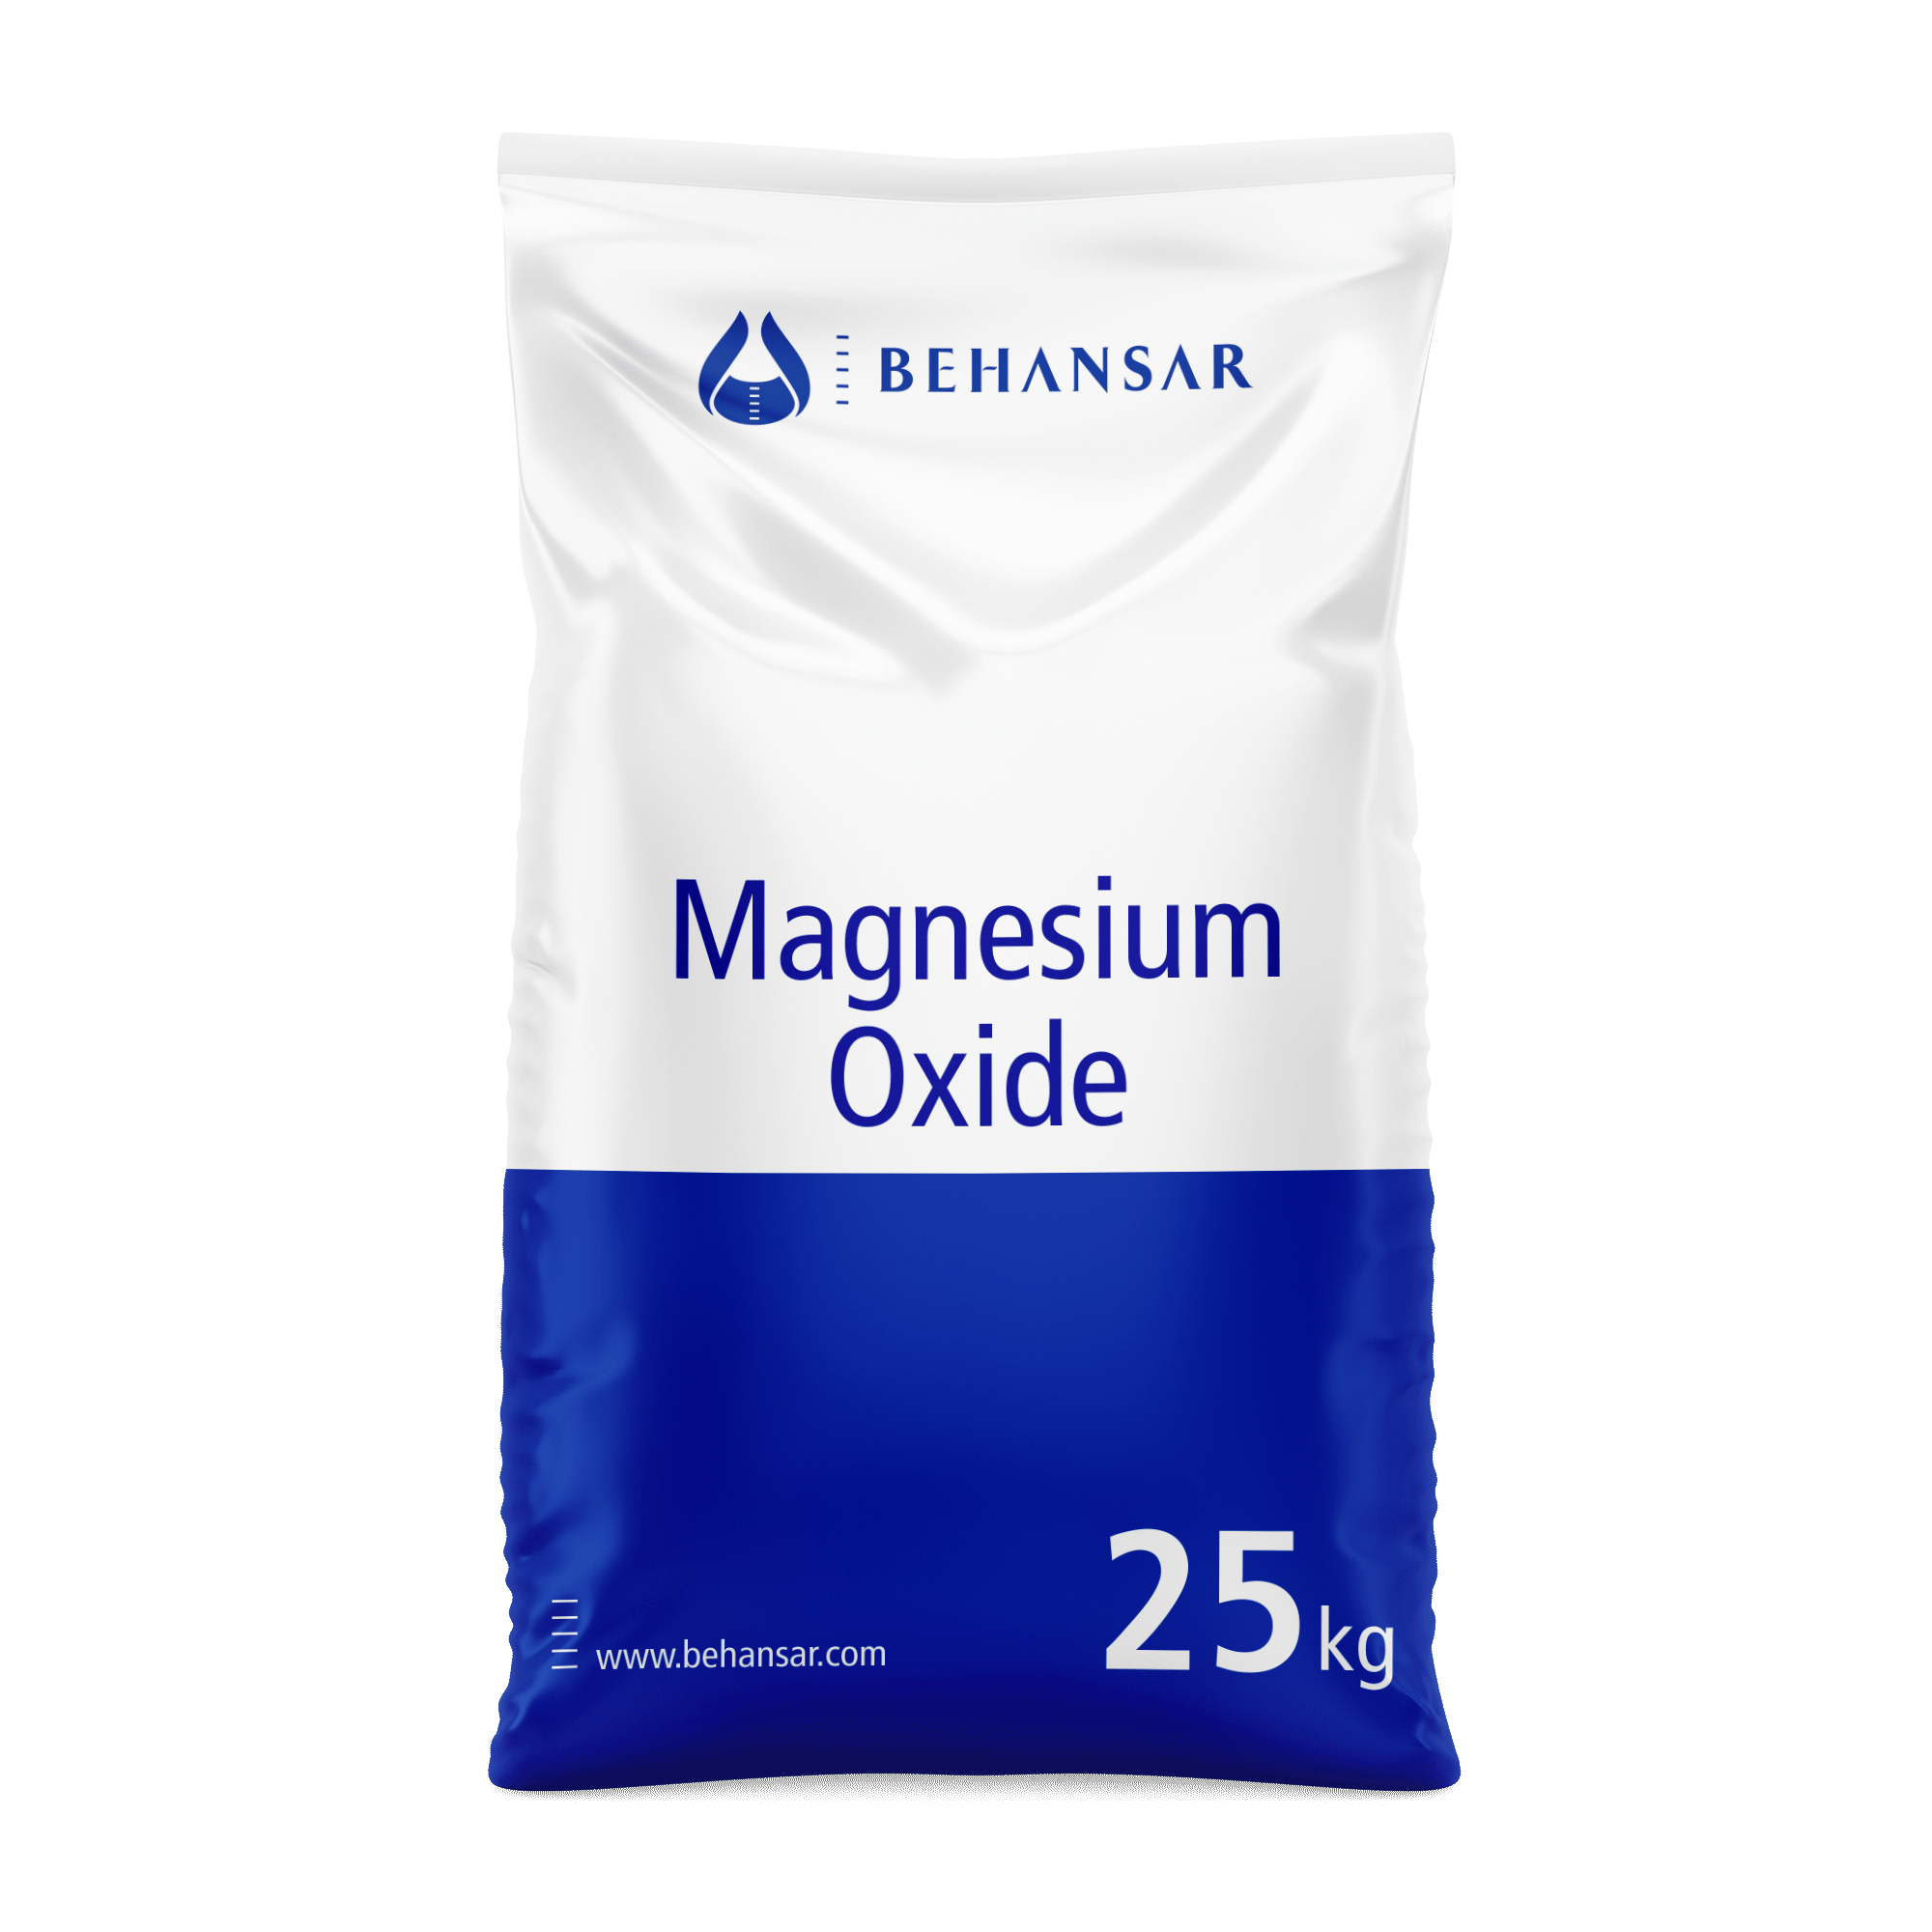 Magnesium Oxide is one of the products of Behansar Co